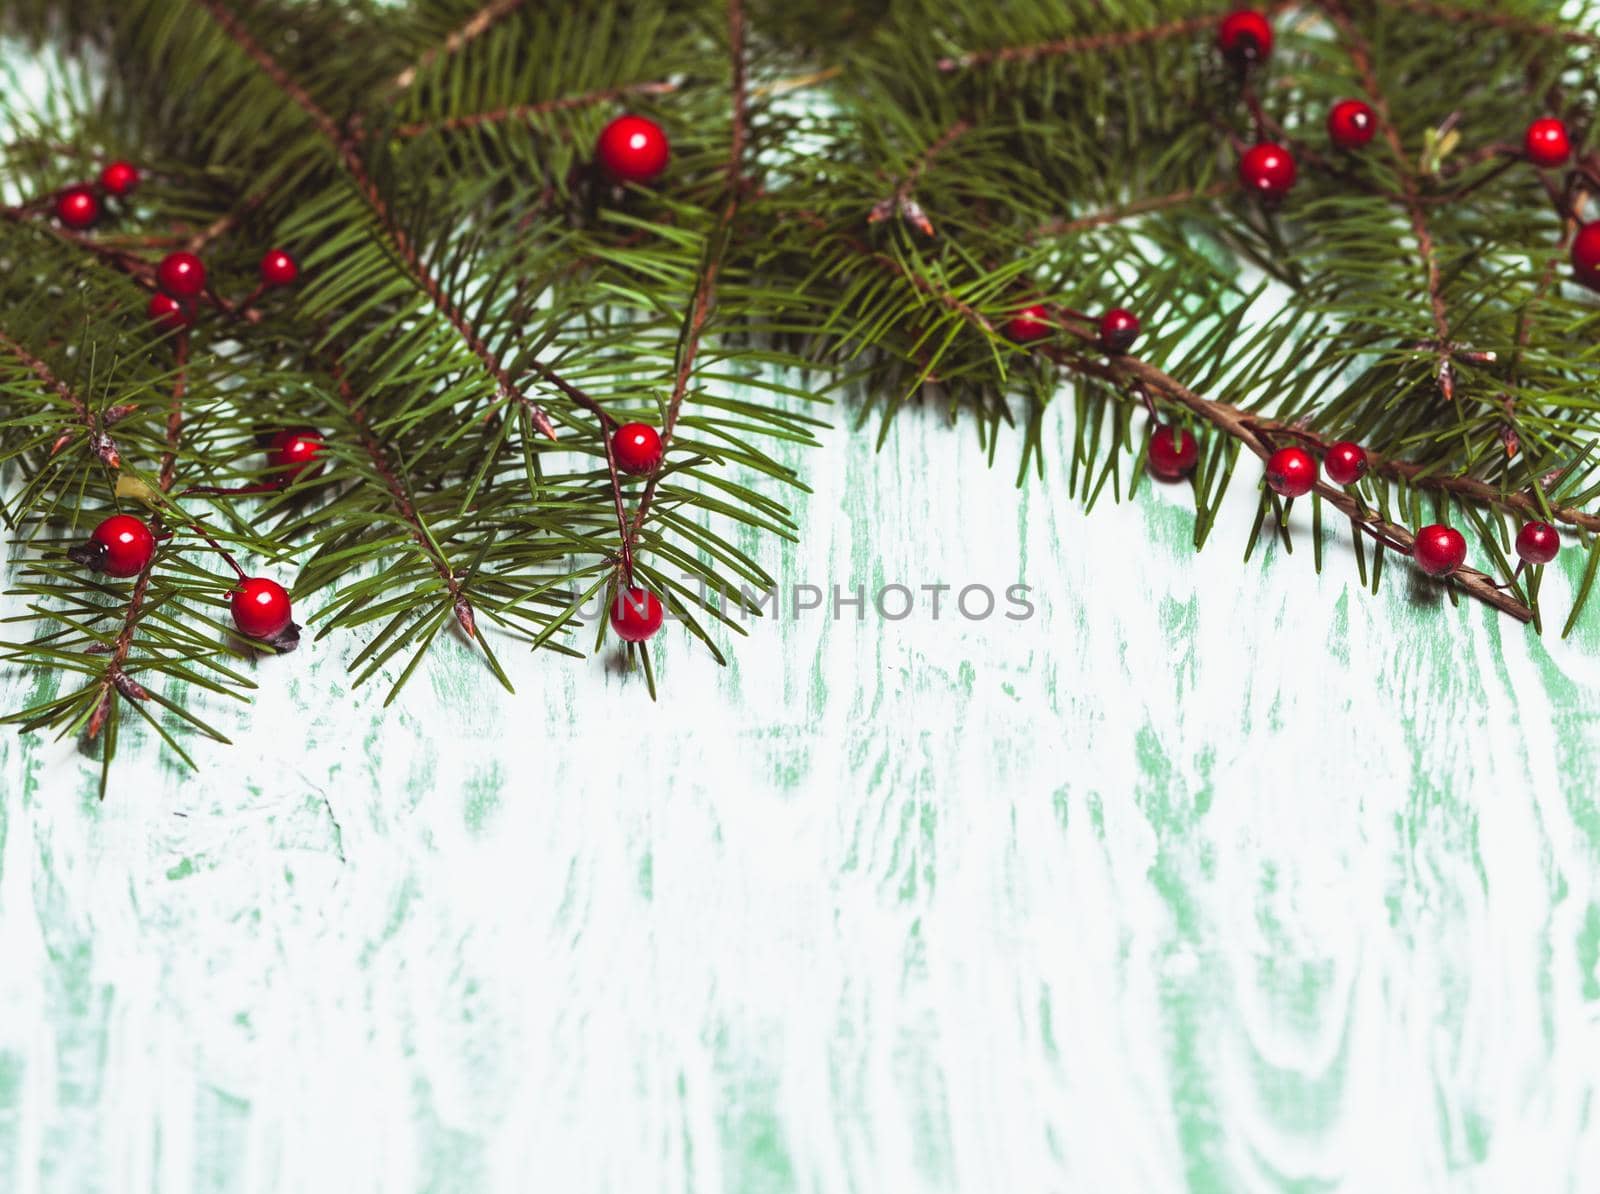 Fir brahcnes with holly berries by oksix